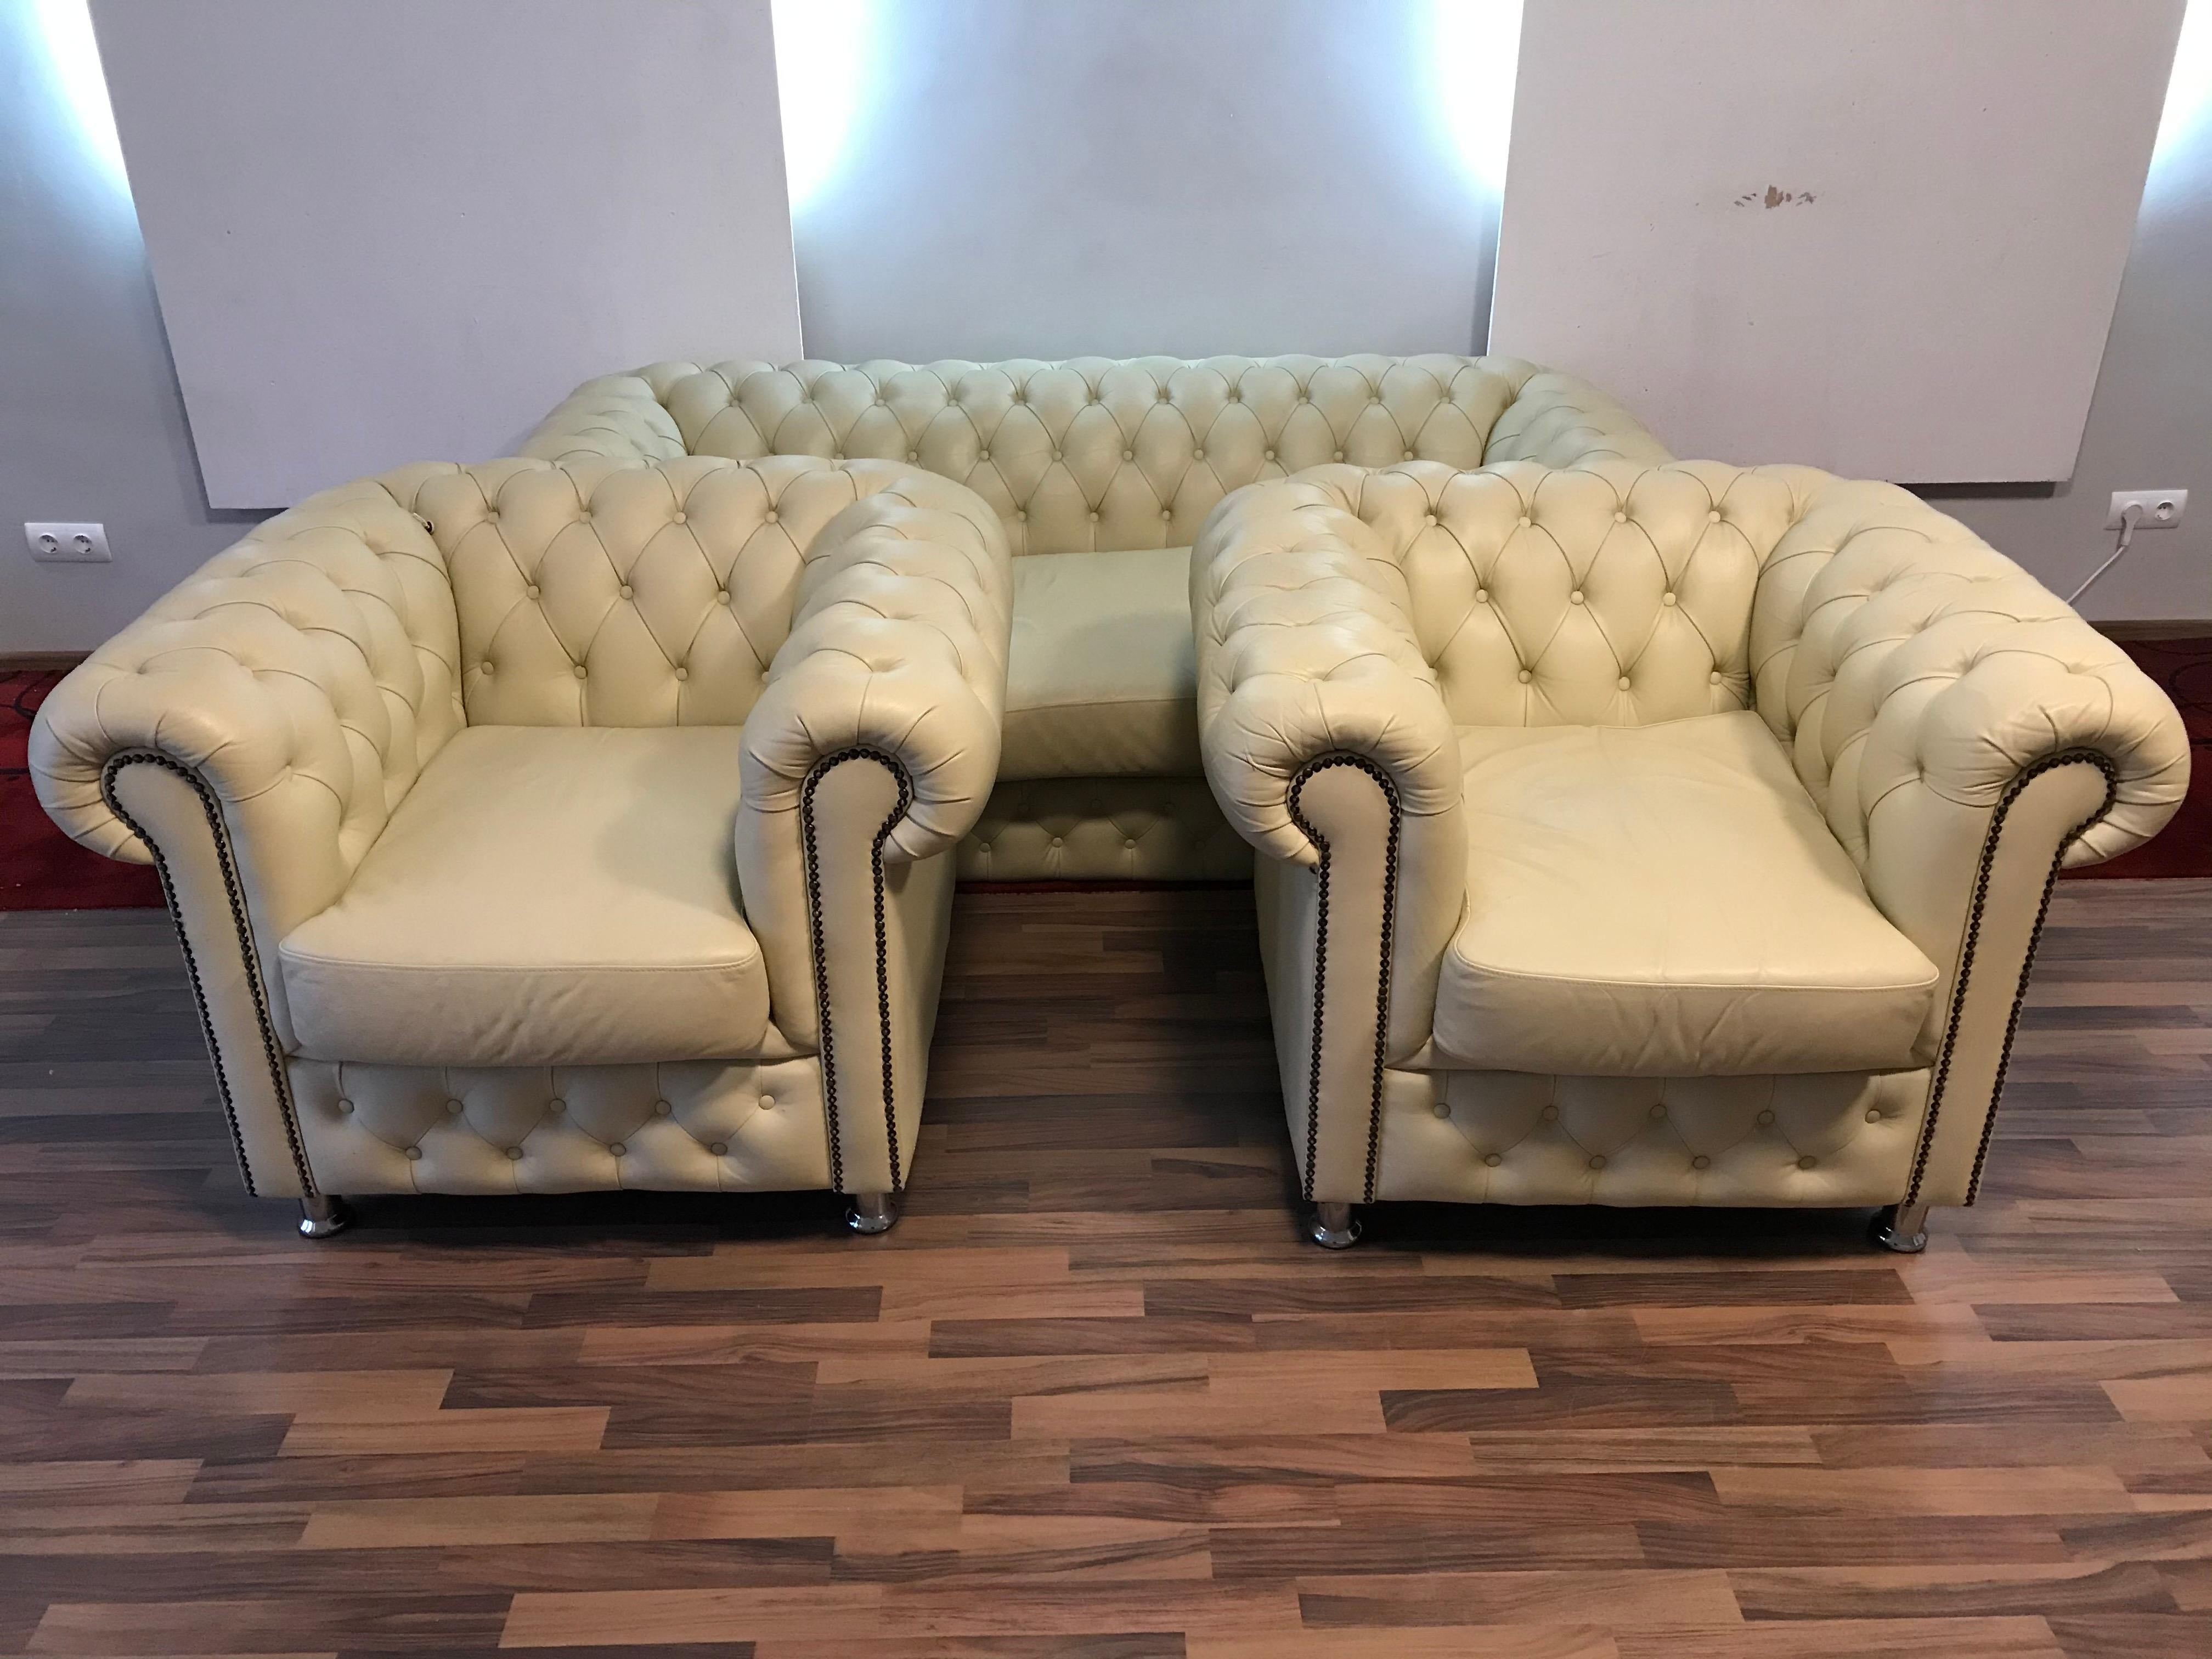 20th Century Original English Chesterfield Set of 3-Seat and 2 Armchairs in Cream Beige